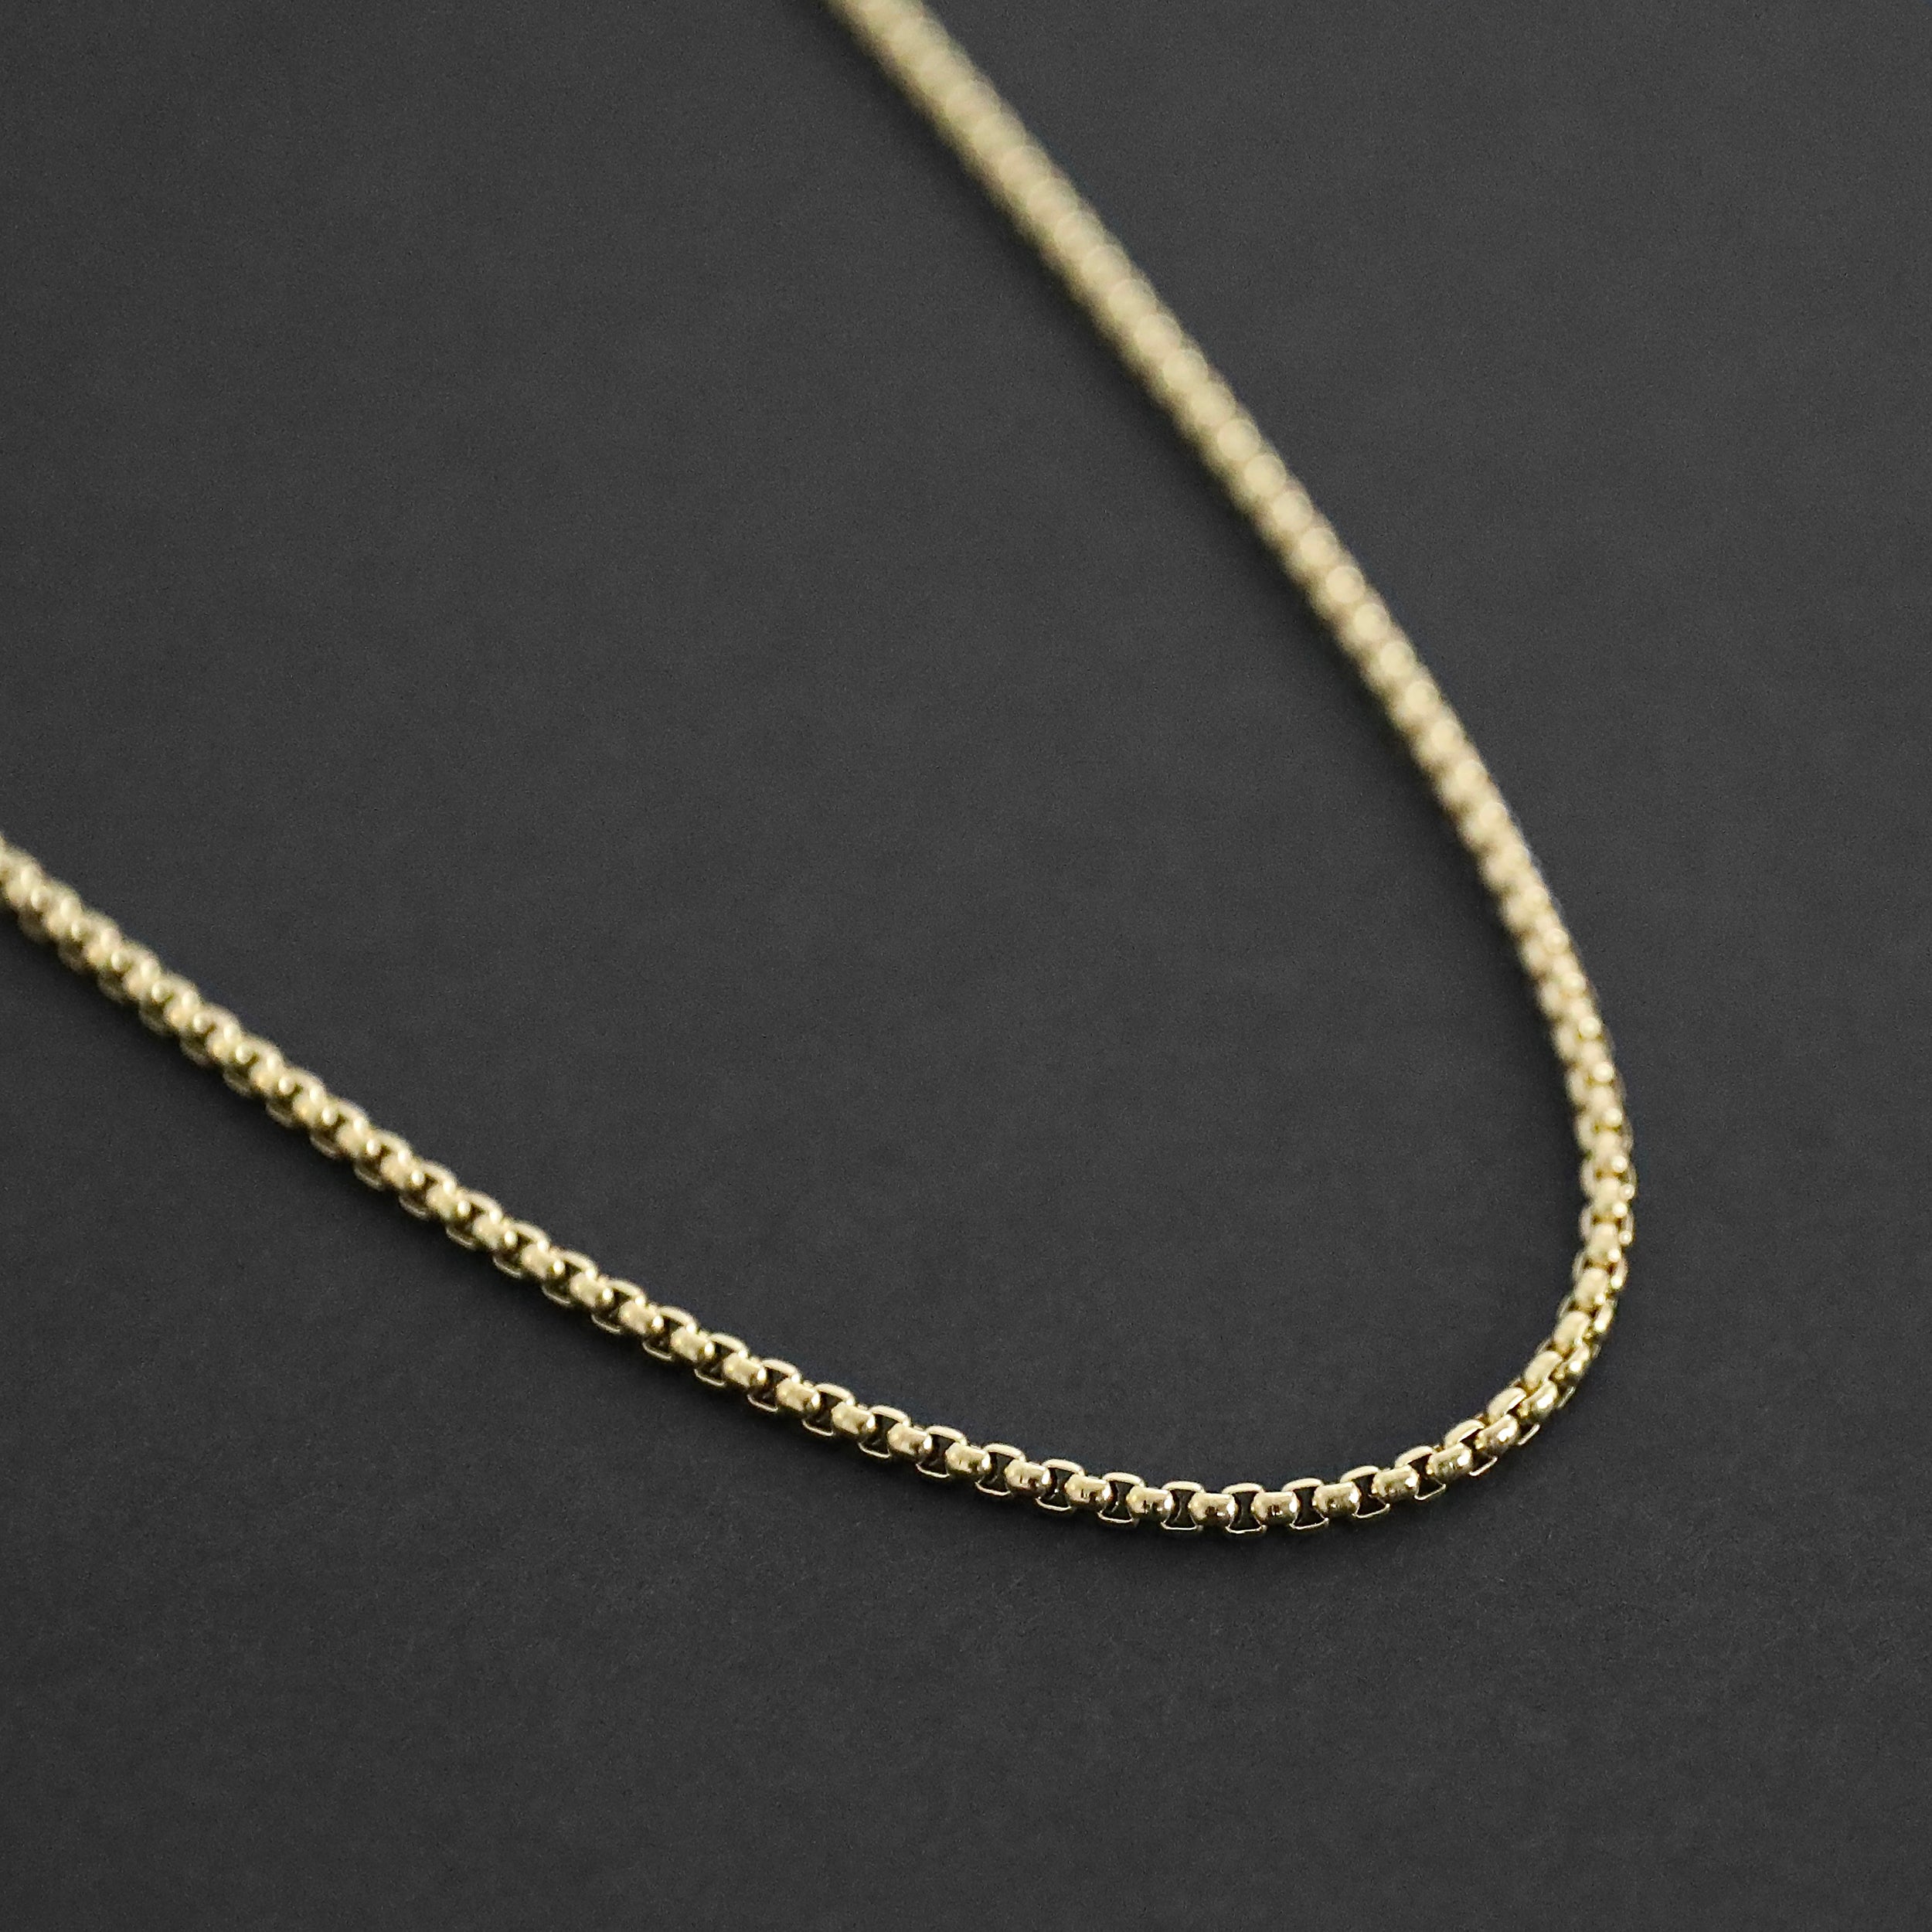 Box Chain Necklace - Gold 3.5mm